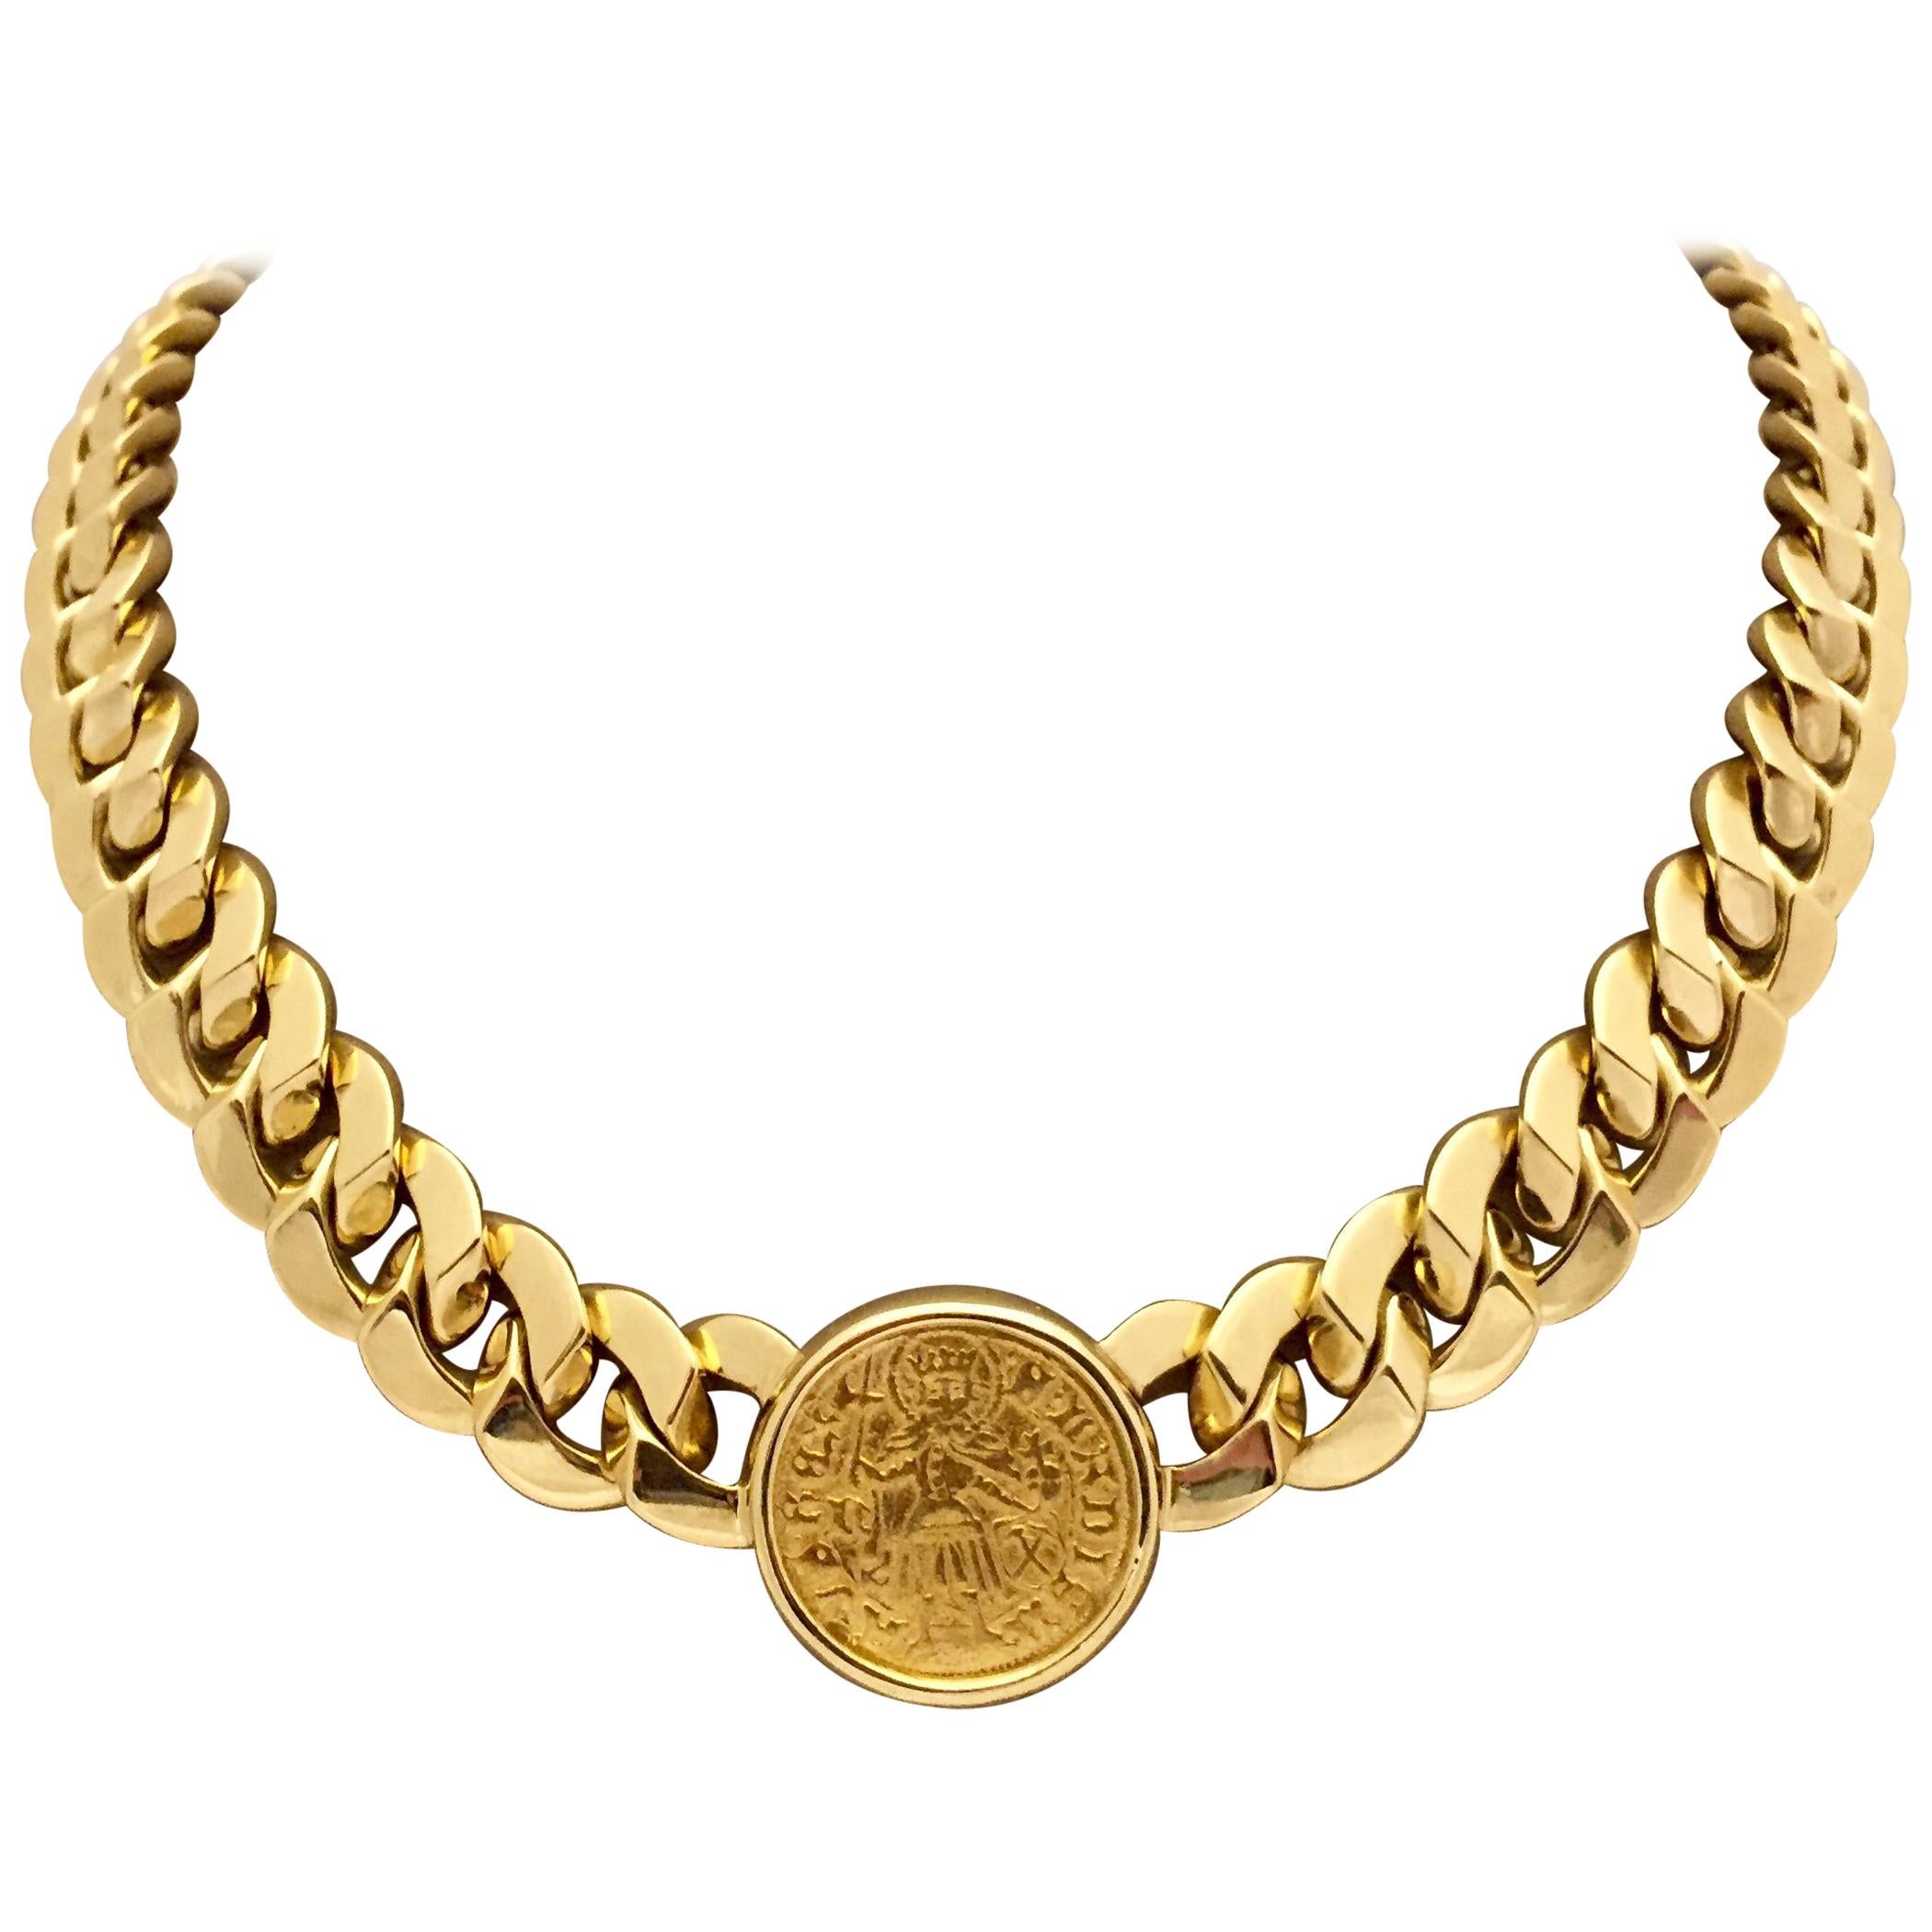 Solid Bulgari 18 Karat Gold Link Necklace with Ancient Roman Coin